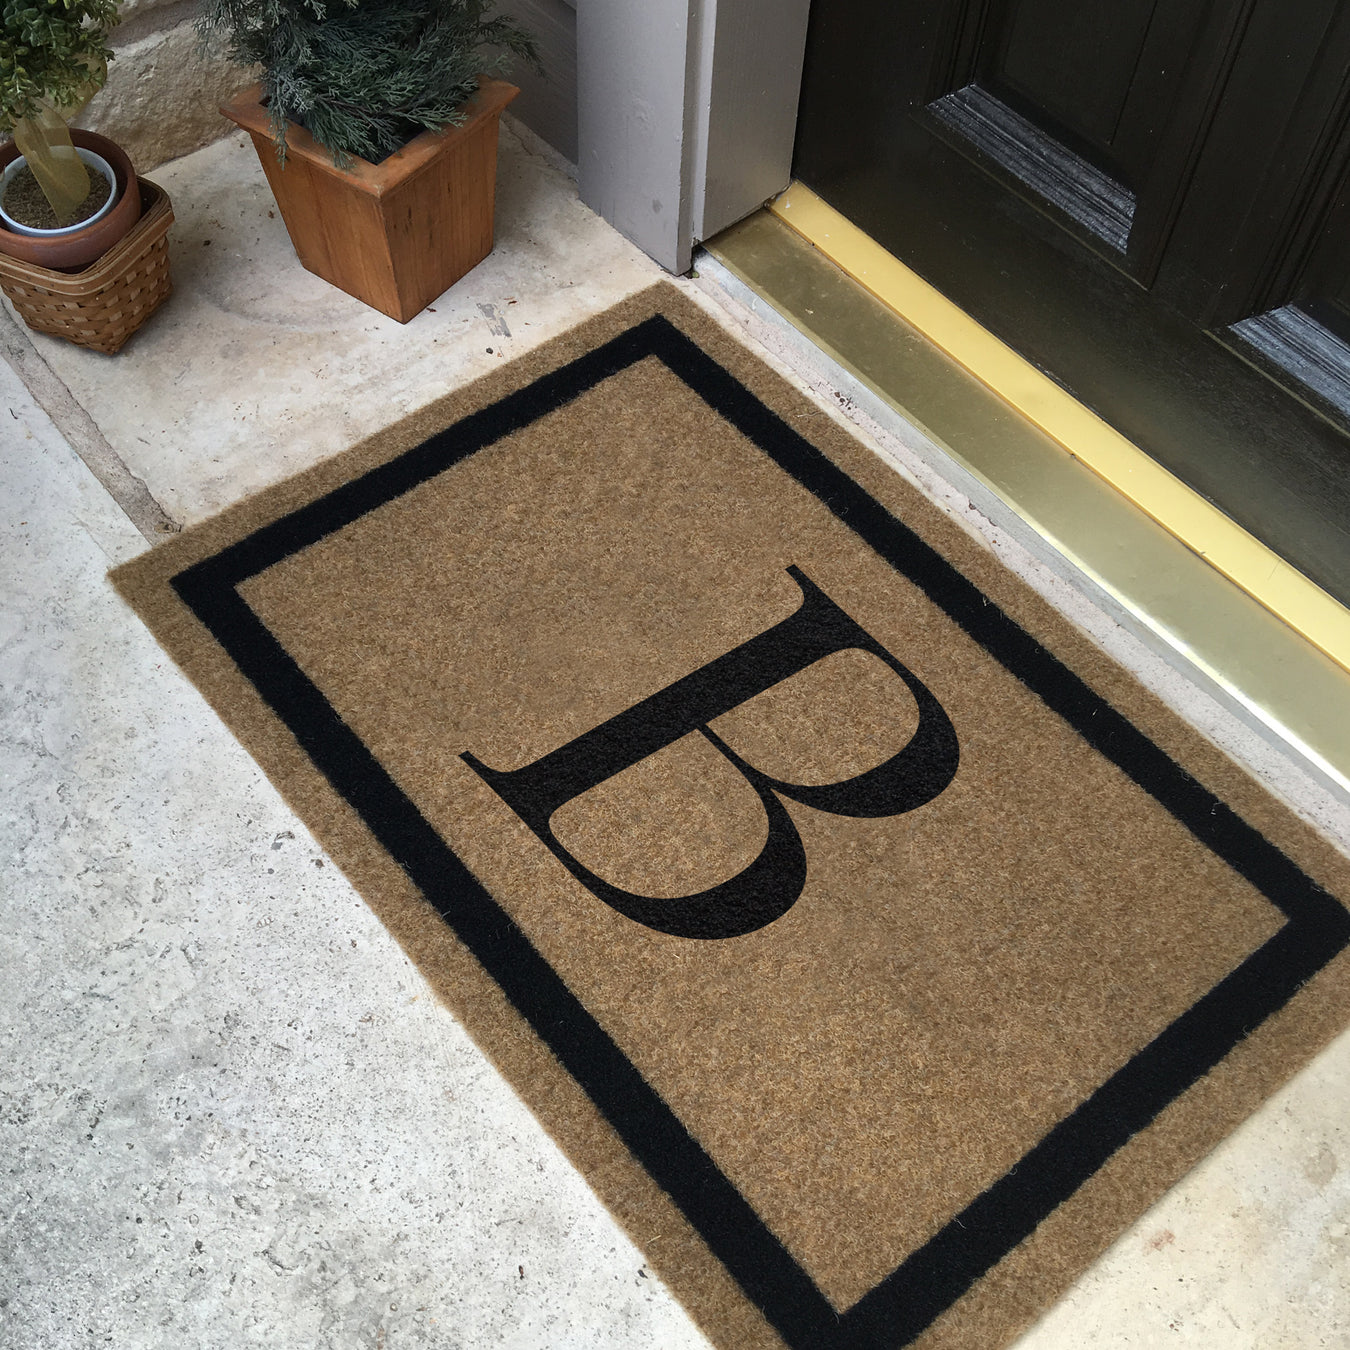 personalized welcome mats